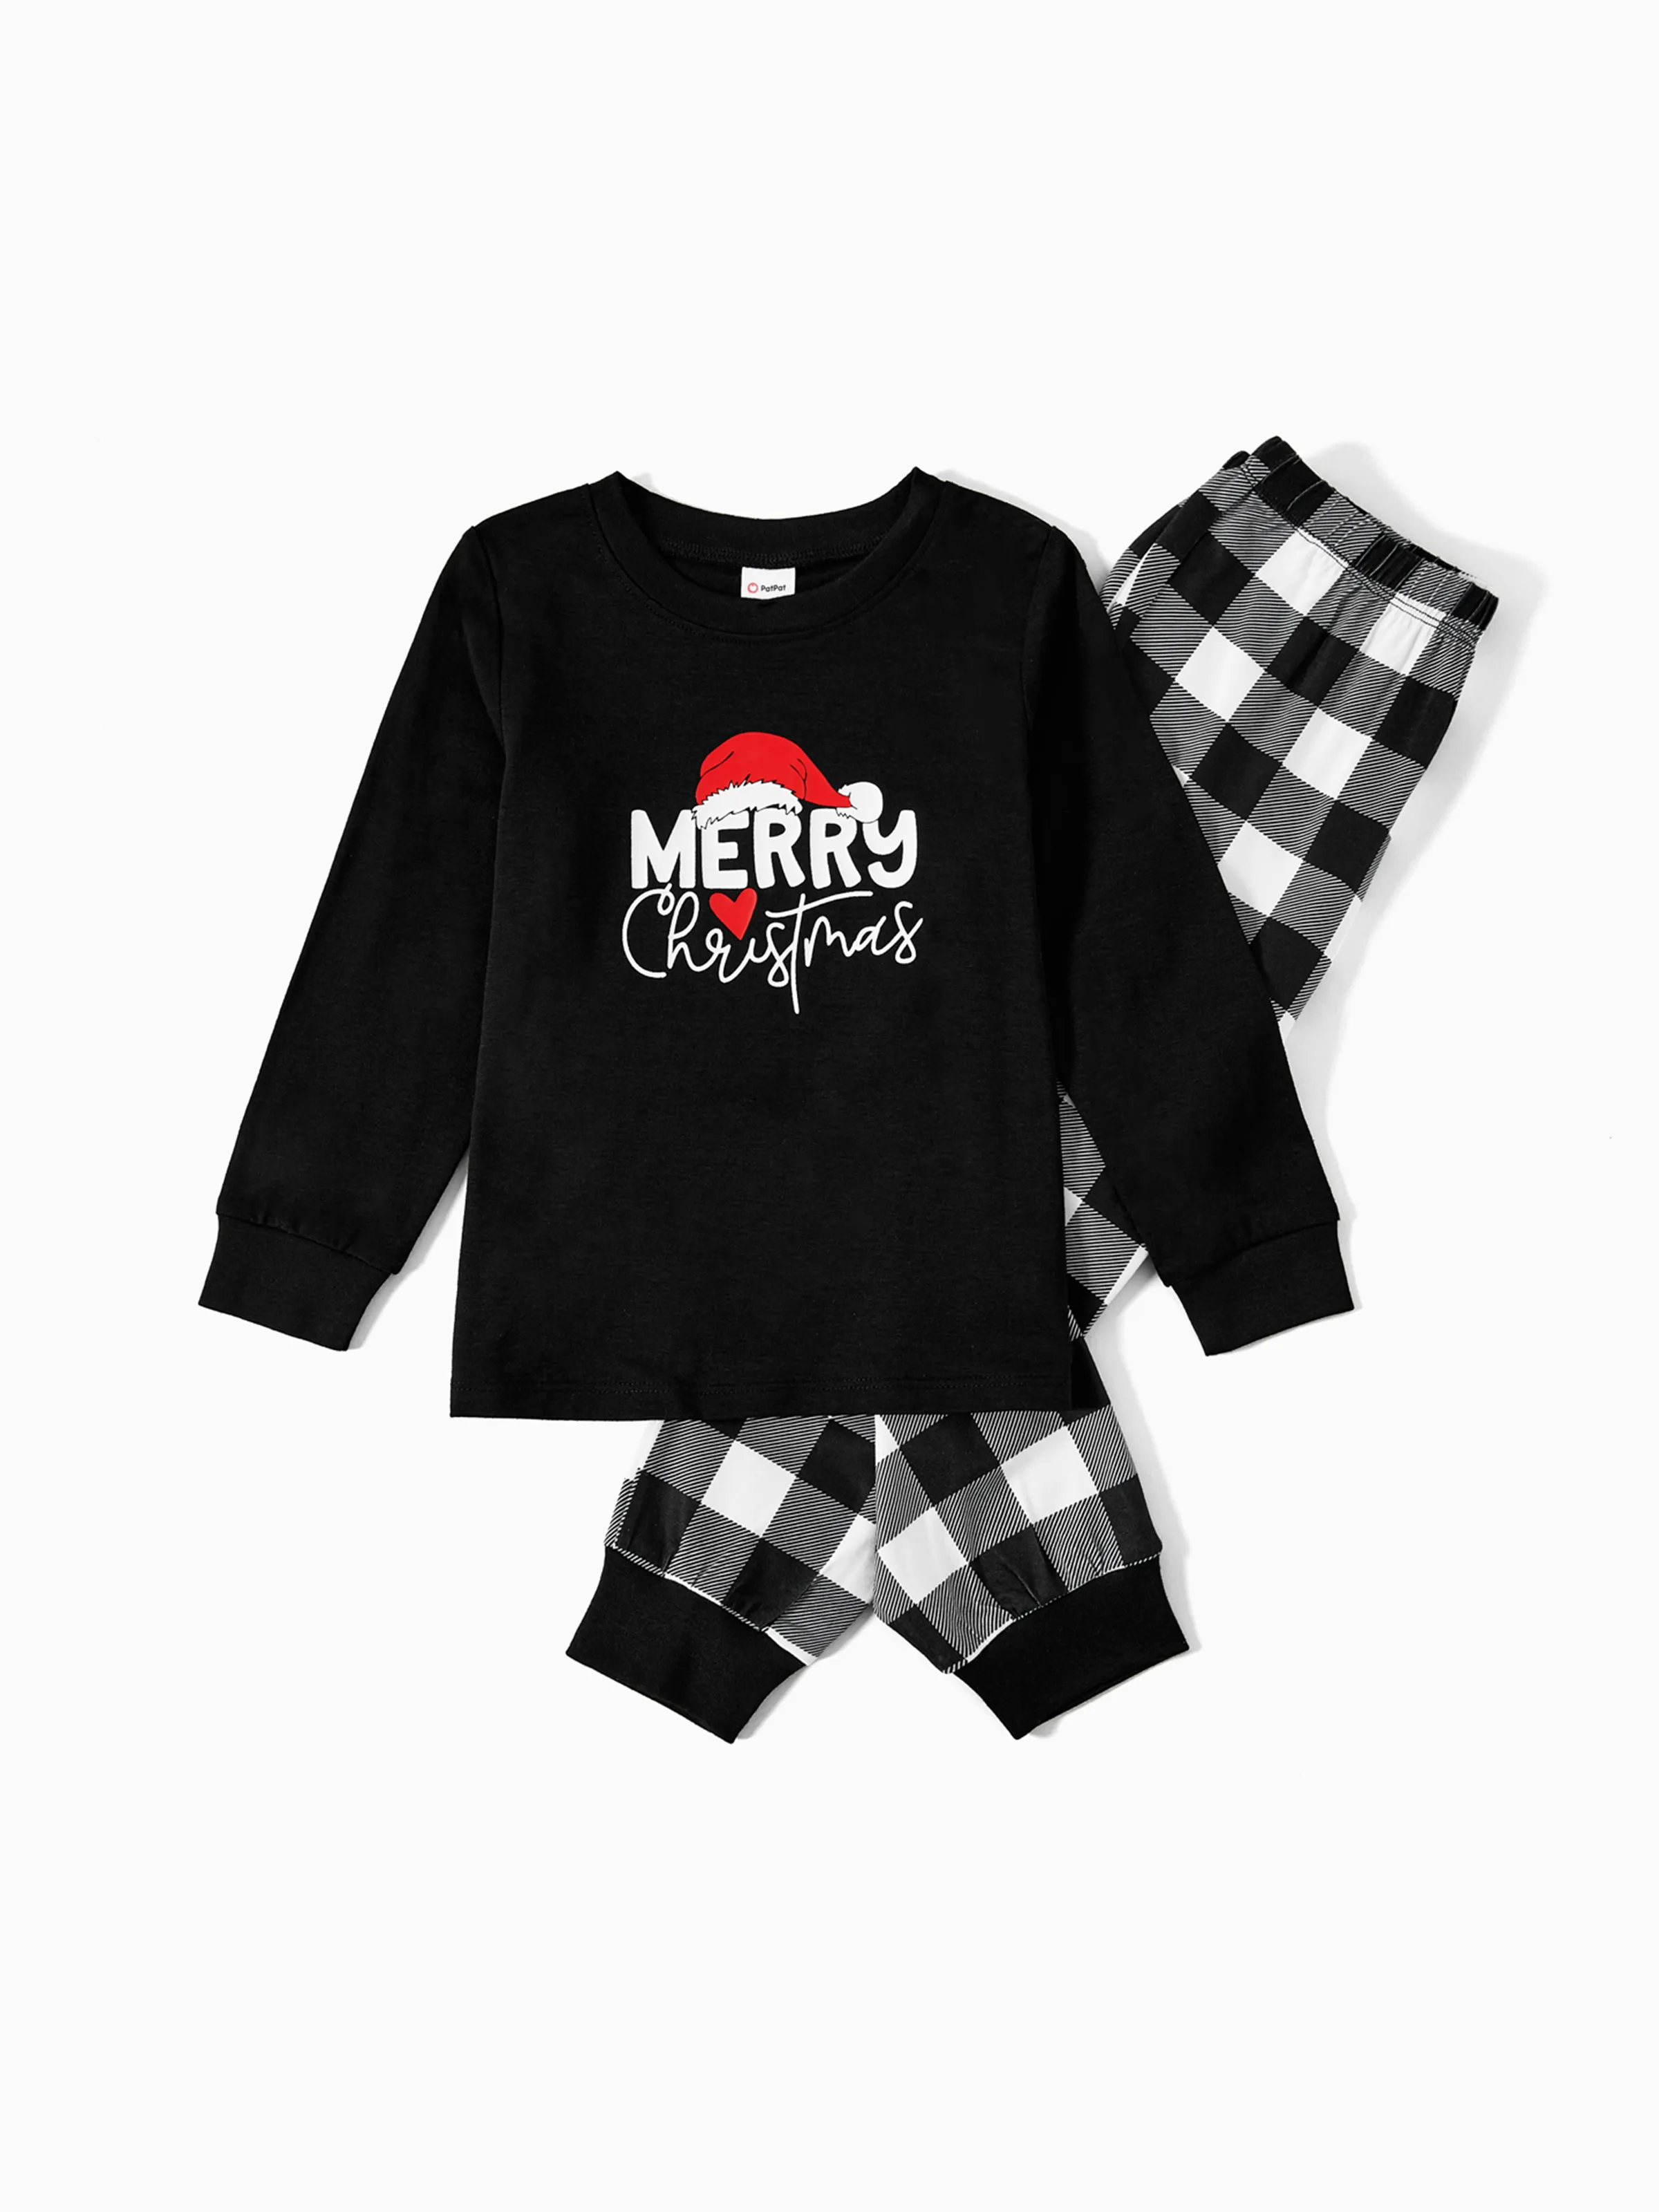 

Christmas Family Matching Glow In The Dark Letters Print Long-sleeve Pajamas Sets (Flame resistant)